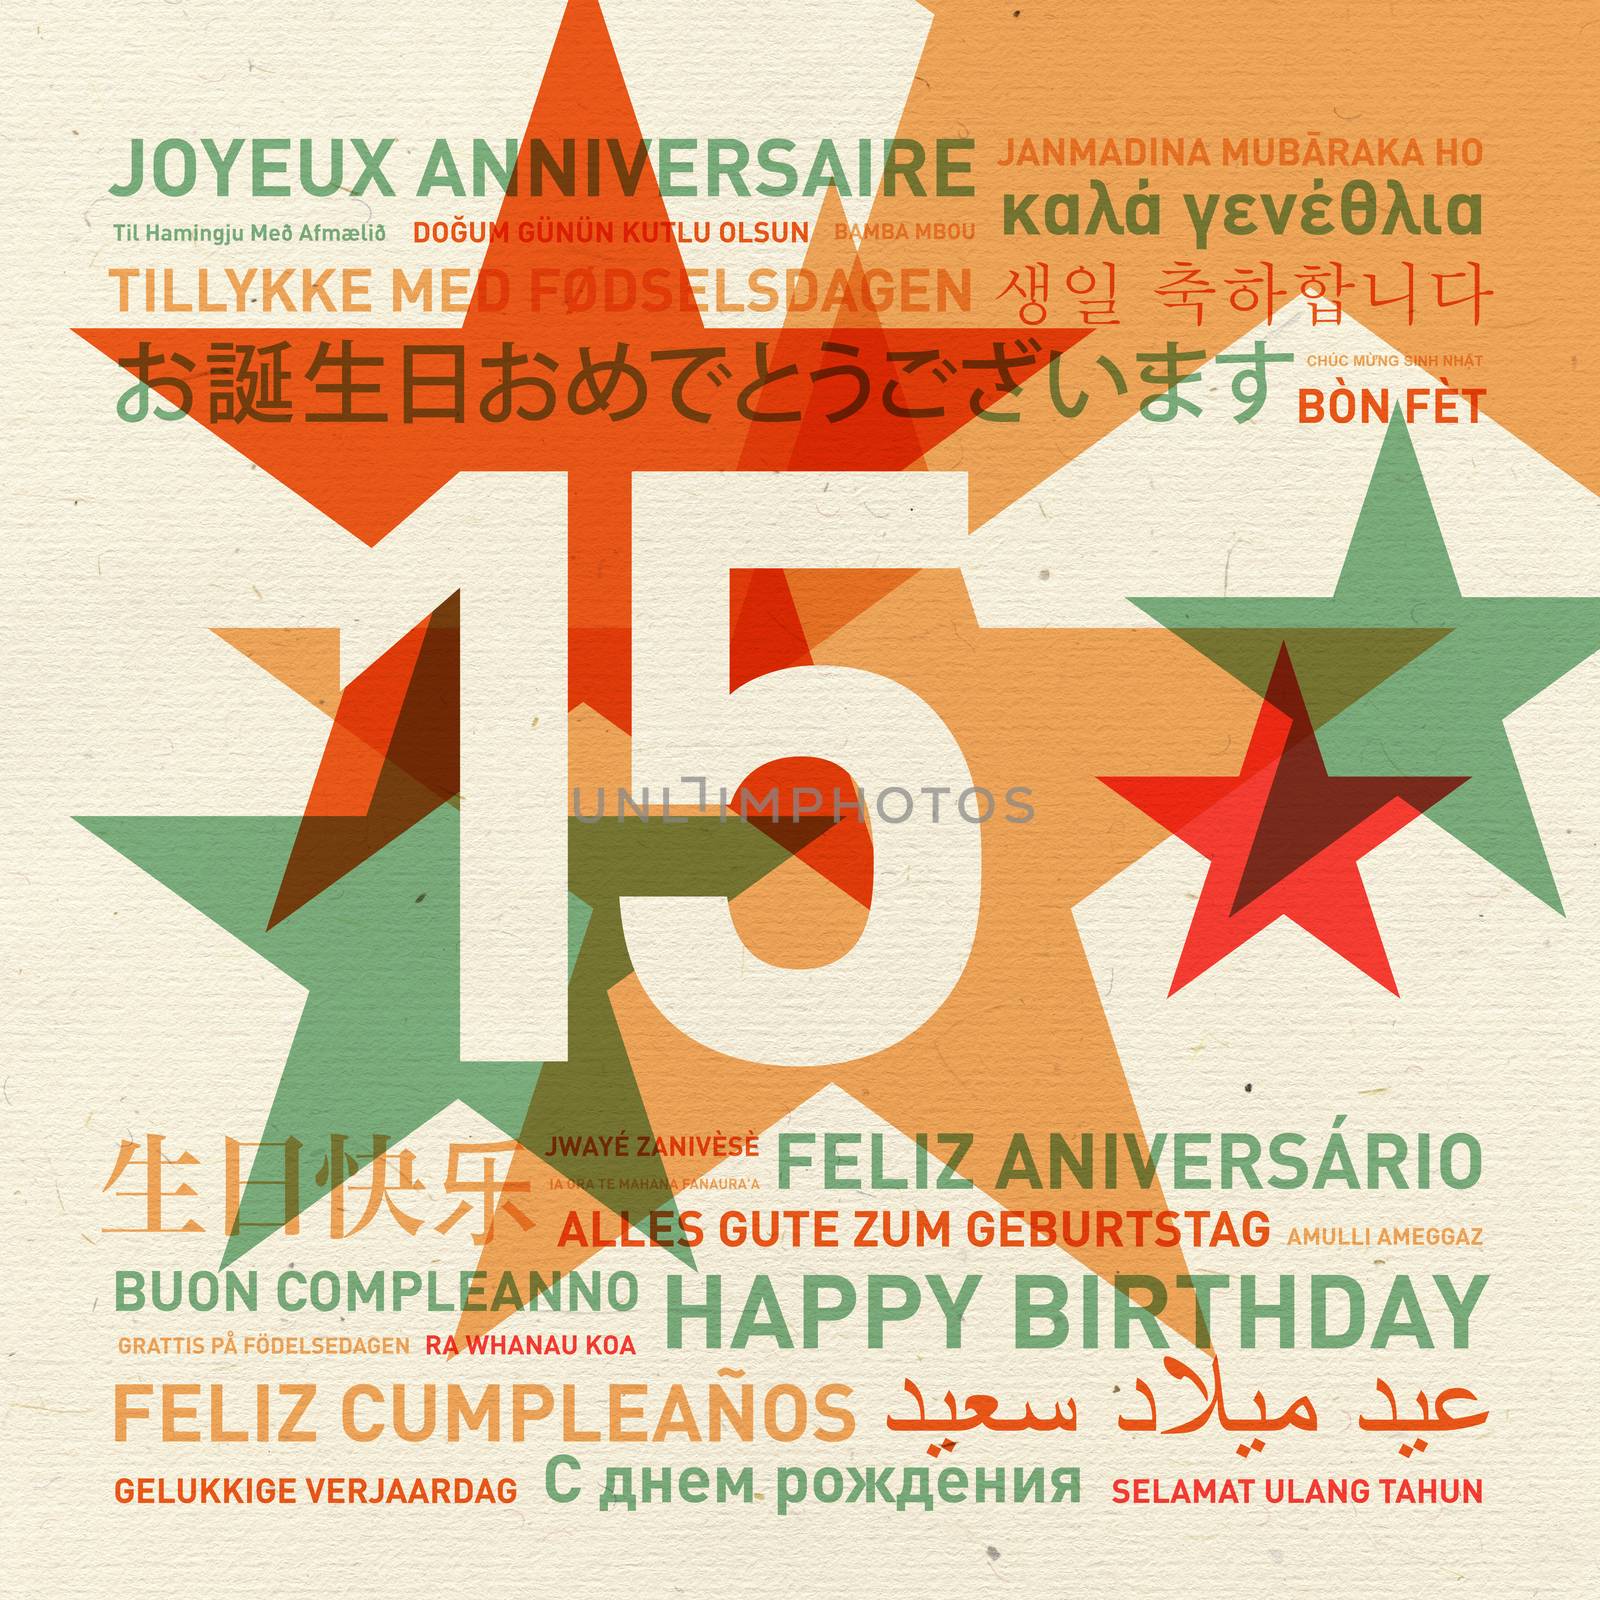 15th anniversary happy birthday from the world. Different languages celebration card